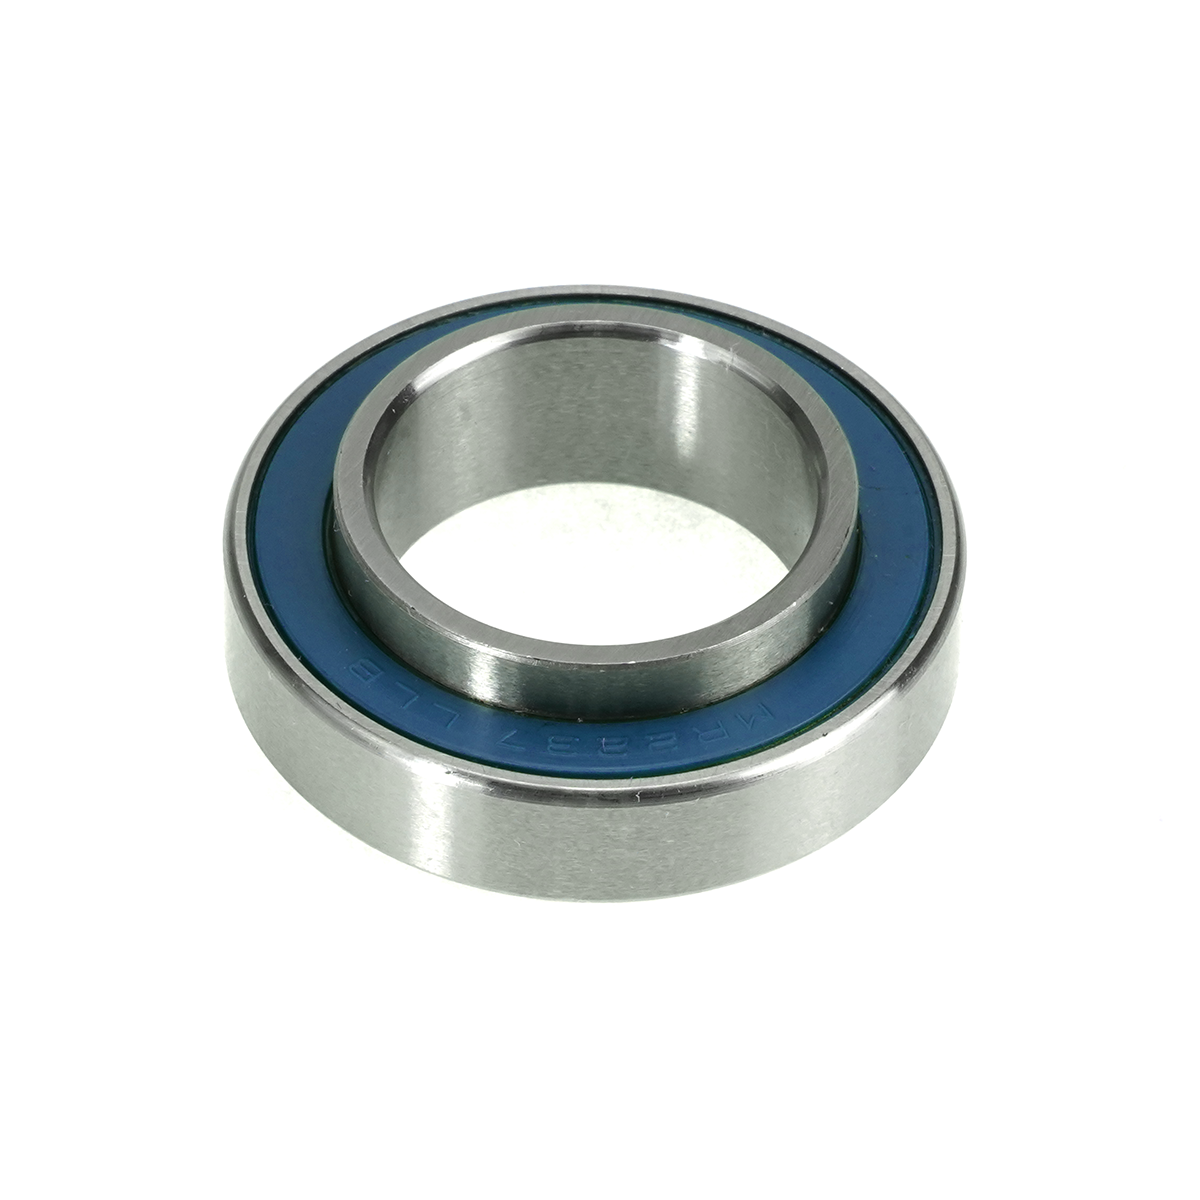 MR 22378 LLB-E - Extended Race ABEC-3 Radial Bearing (C3 Clearance) - 22mm  x 37mm x 8/11.5mm